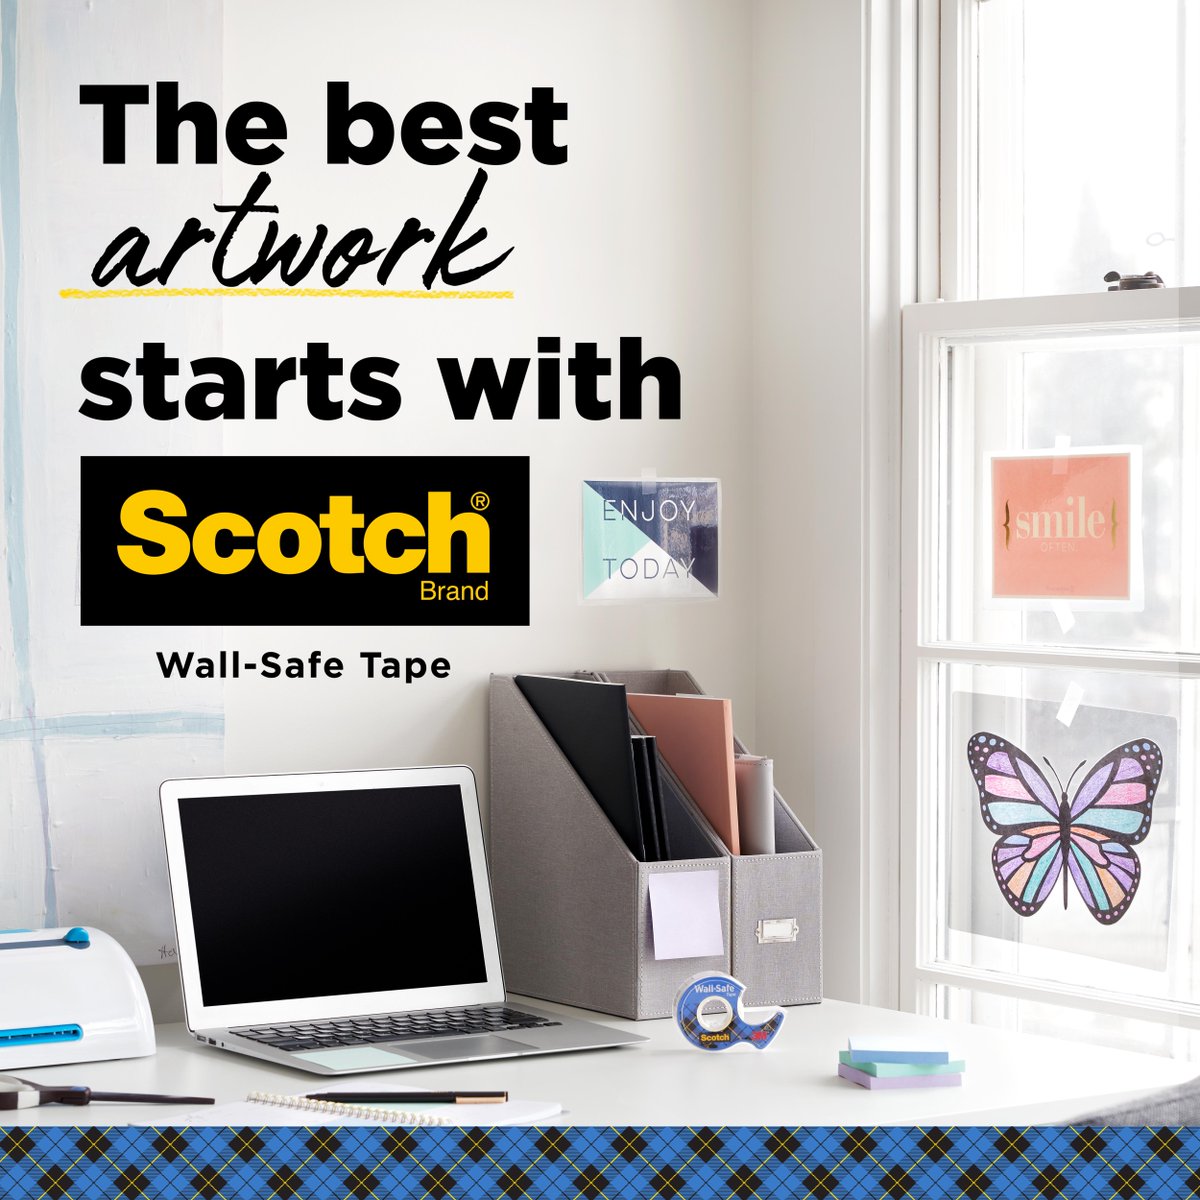 Hang family art projects without the sticky residue using Scotch® Wall-Safe Tape. #ScotchBrand #workingfromhome